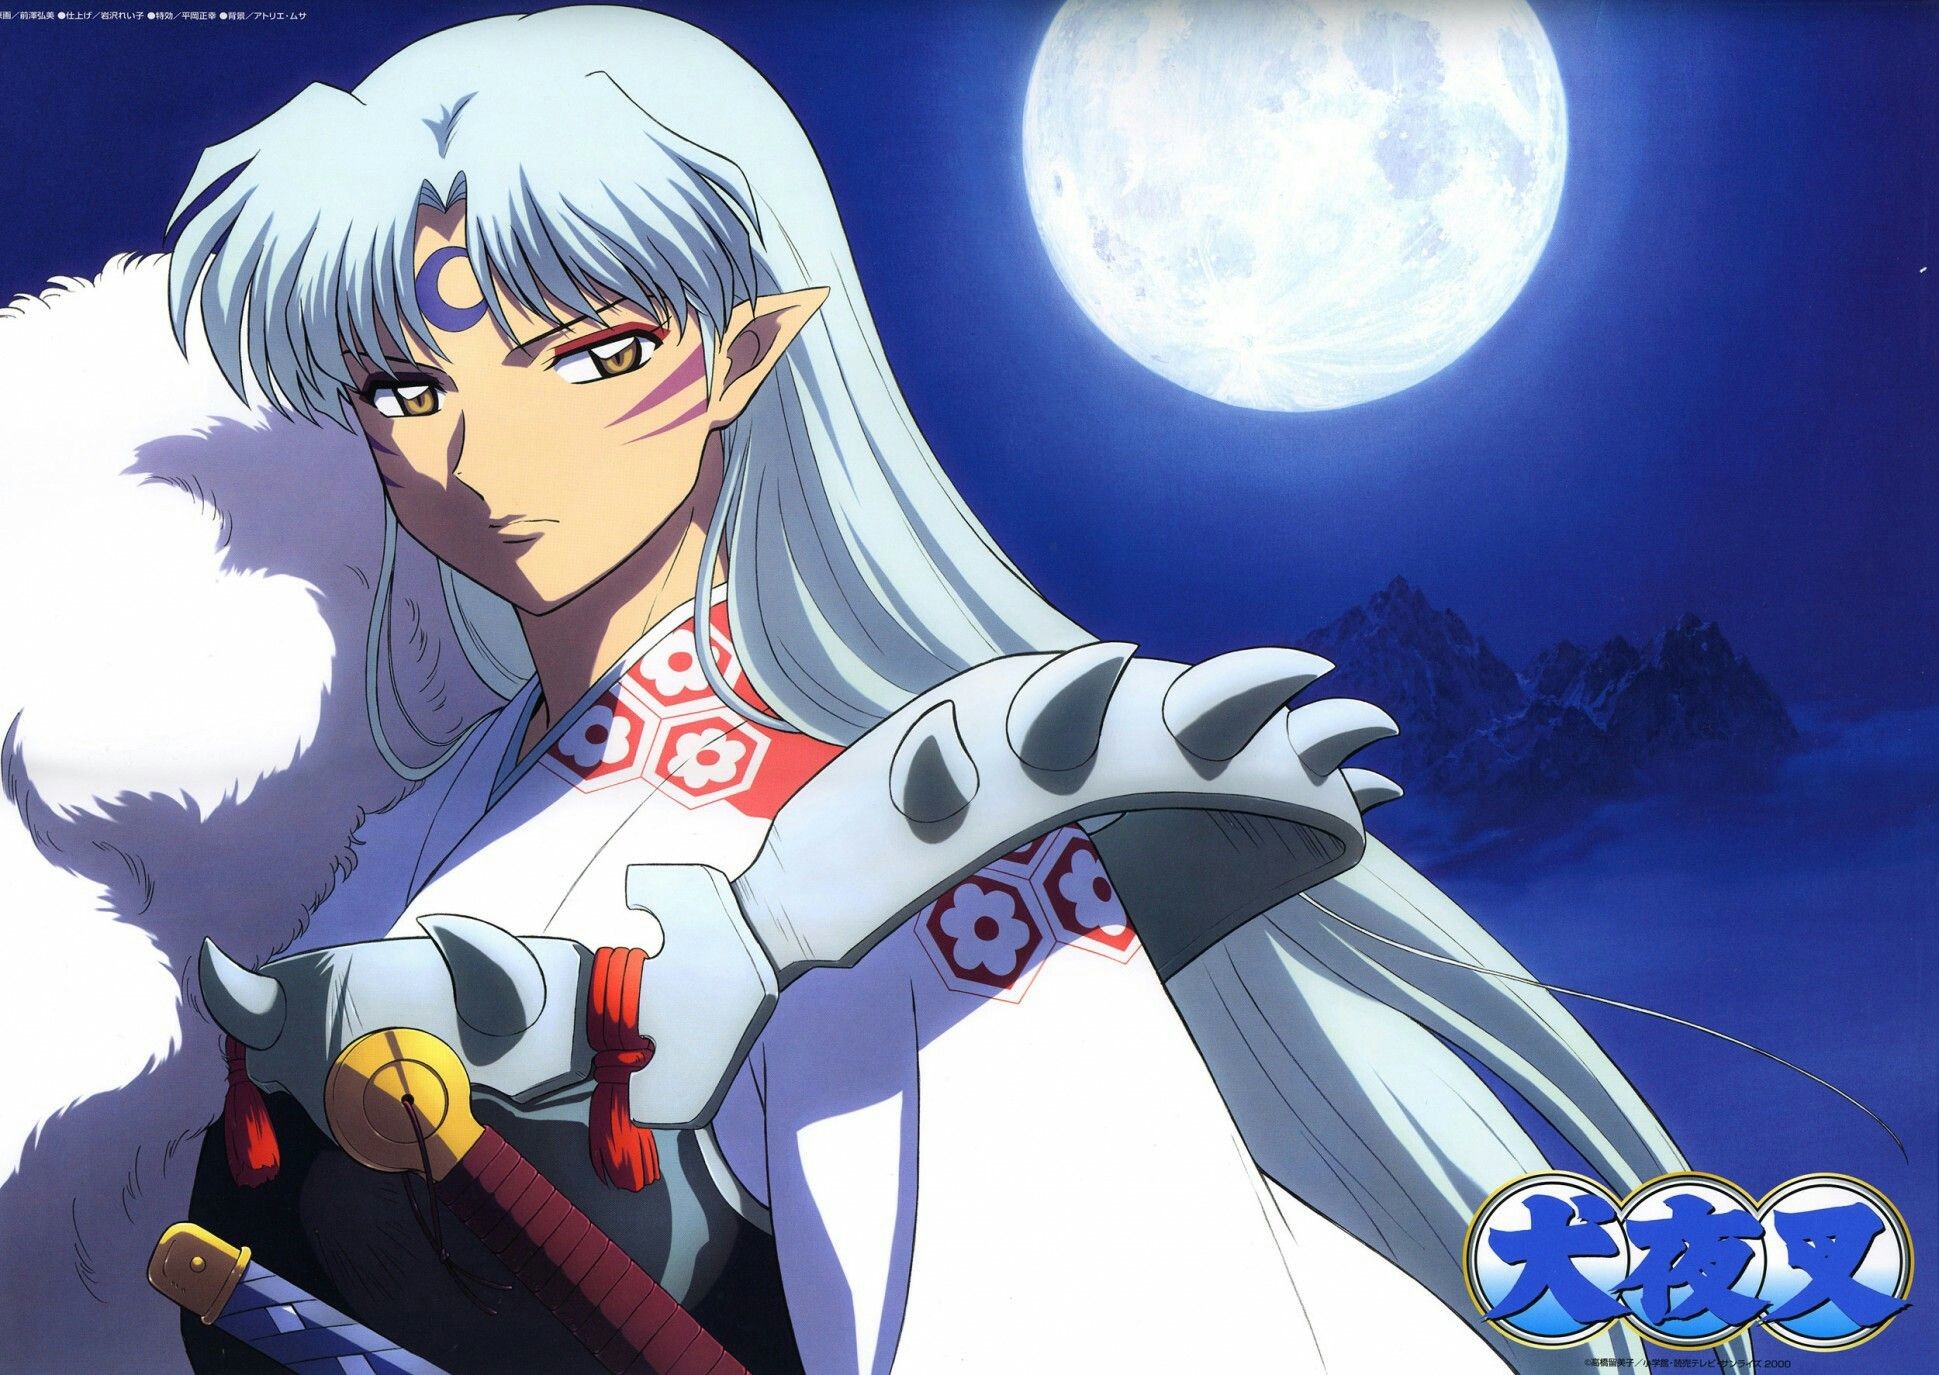 1939x1375 Here's 35 HQ Wallpapers from the hit Anime Inuyasha that you you can save  to your desktop or phone.